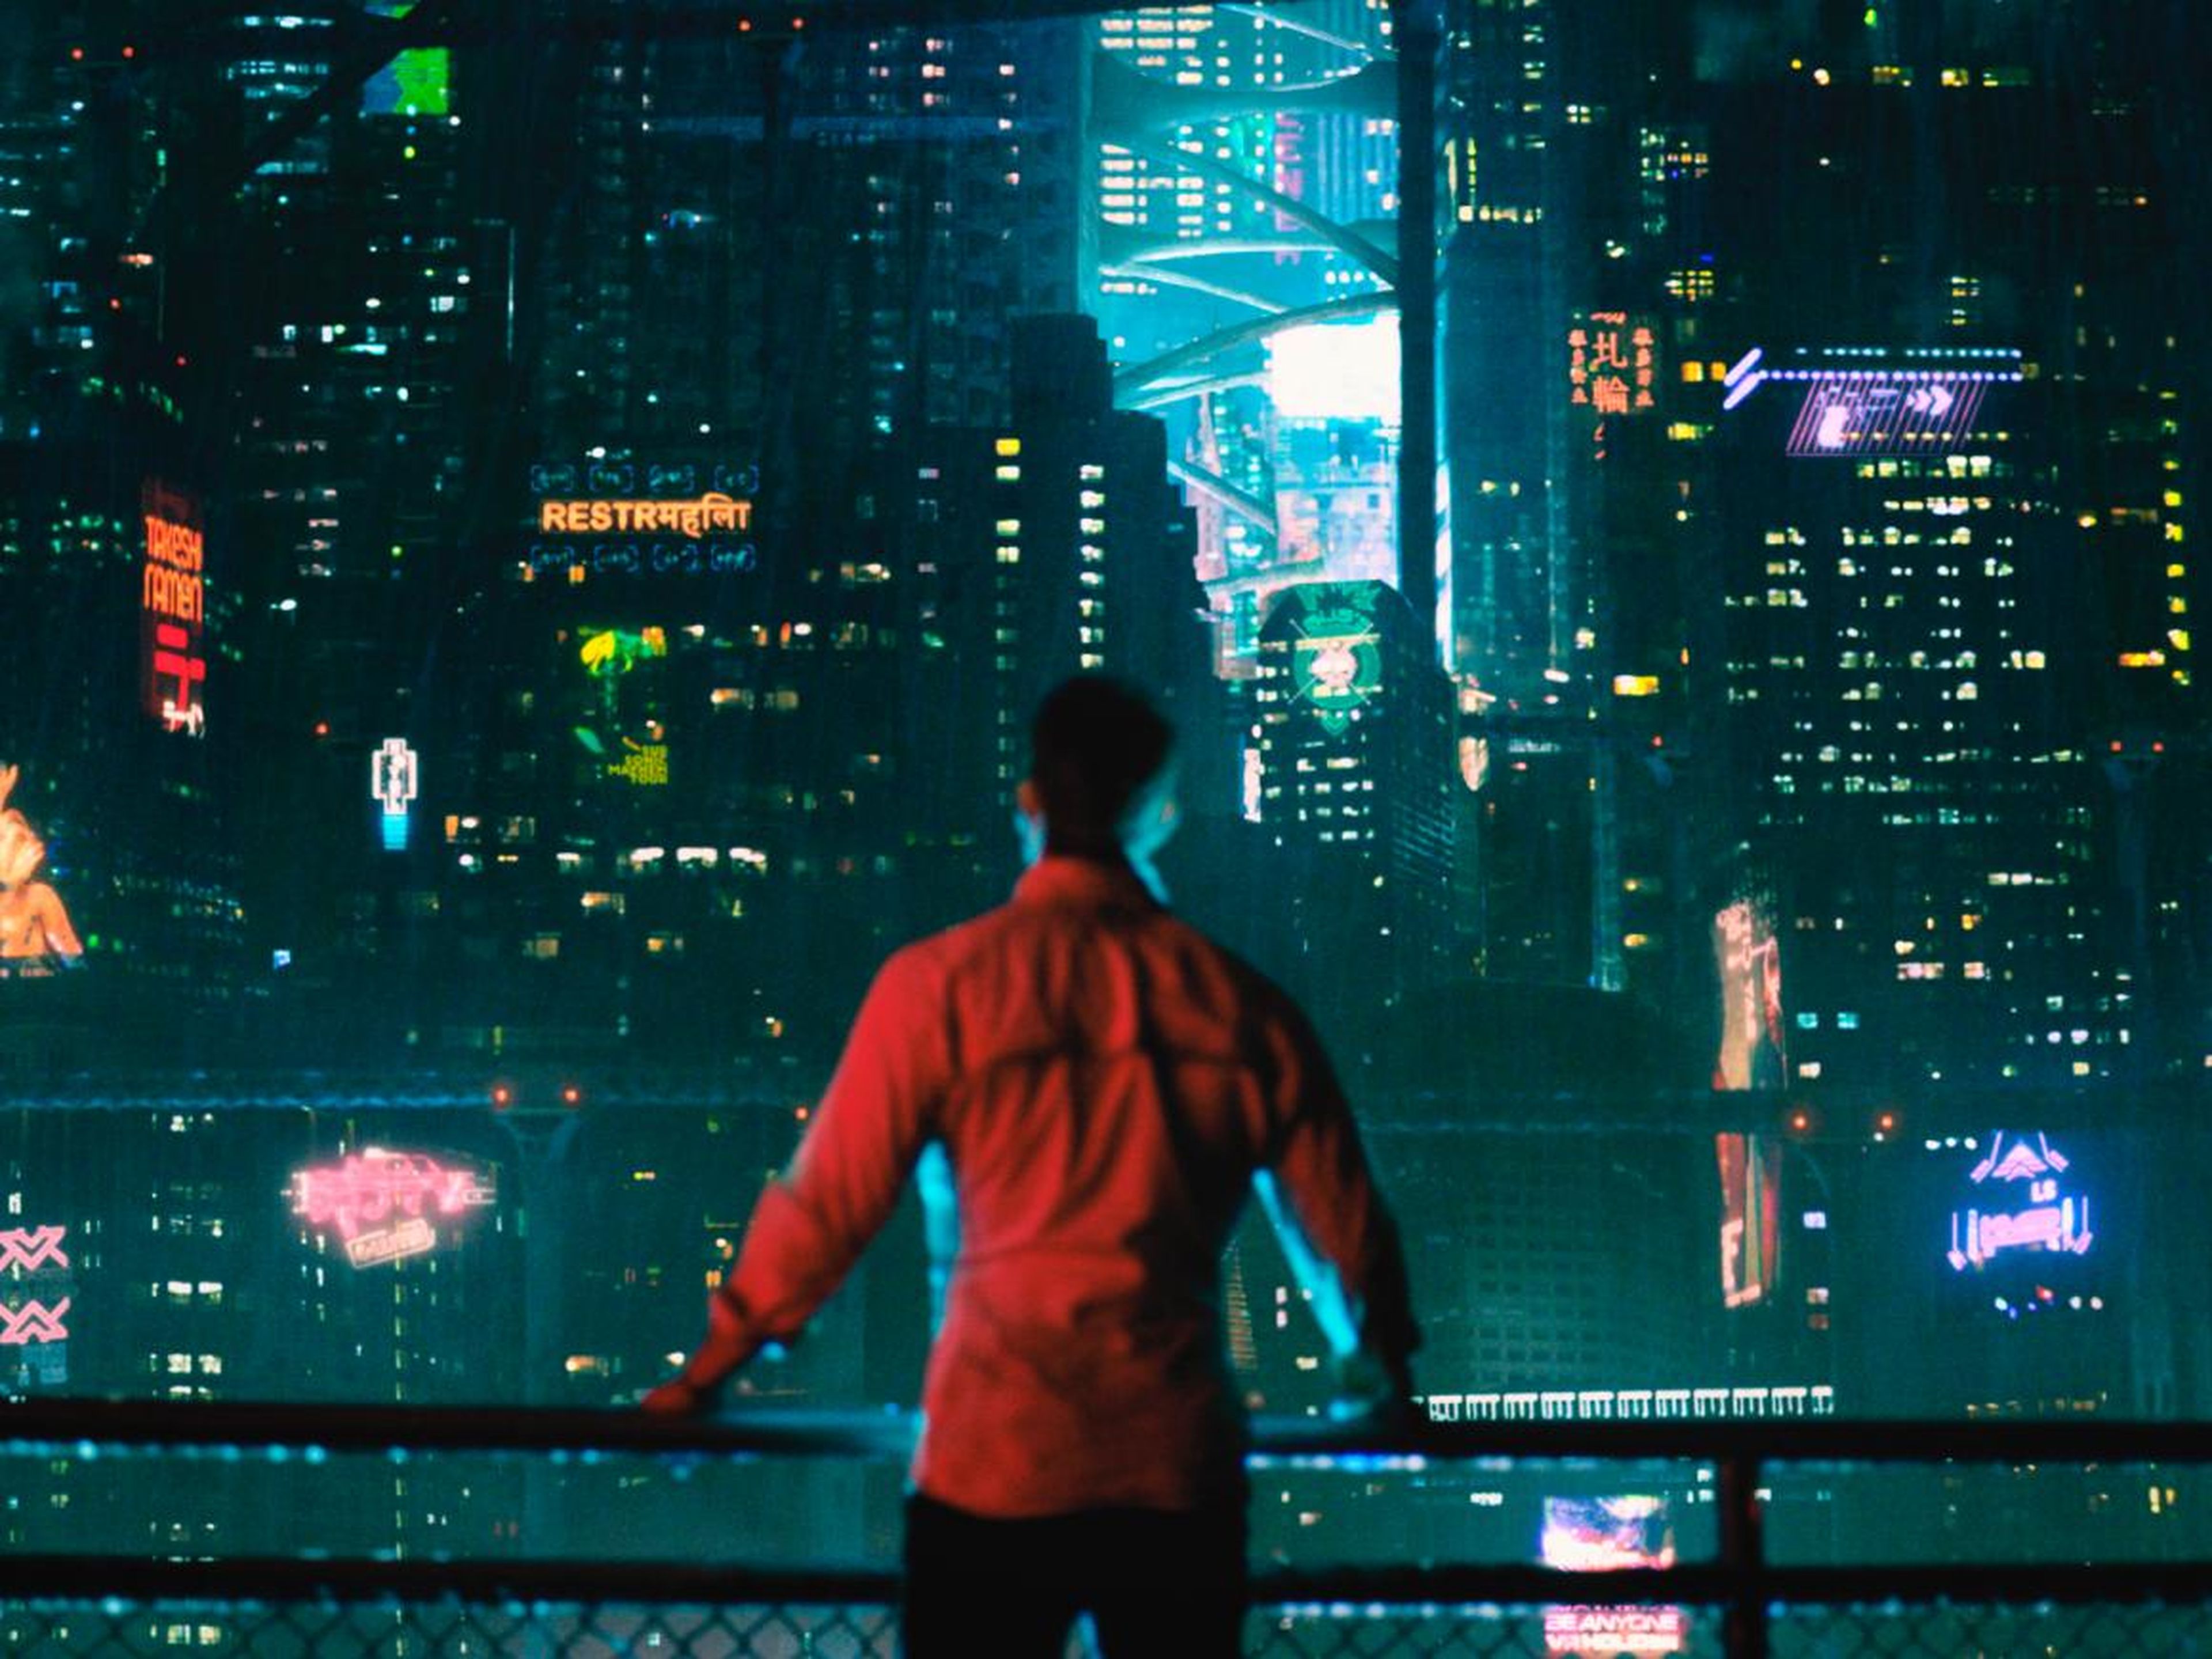 76. "Altered Carbon" — 66%